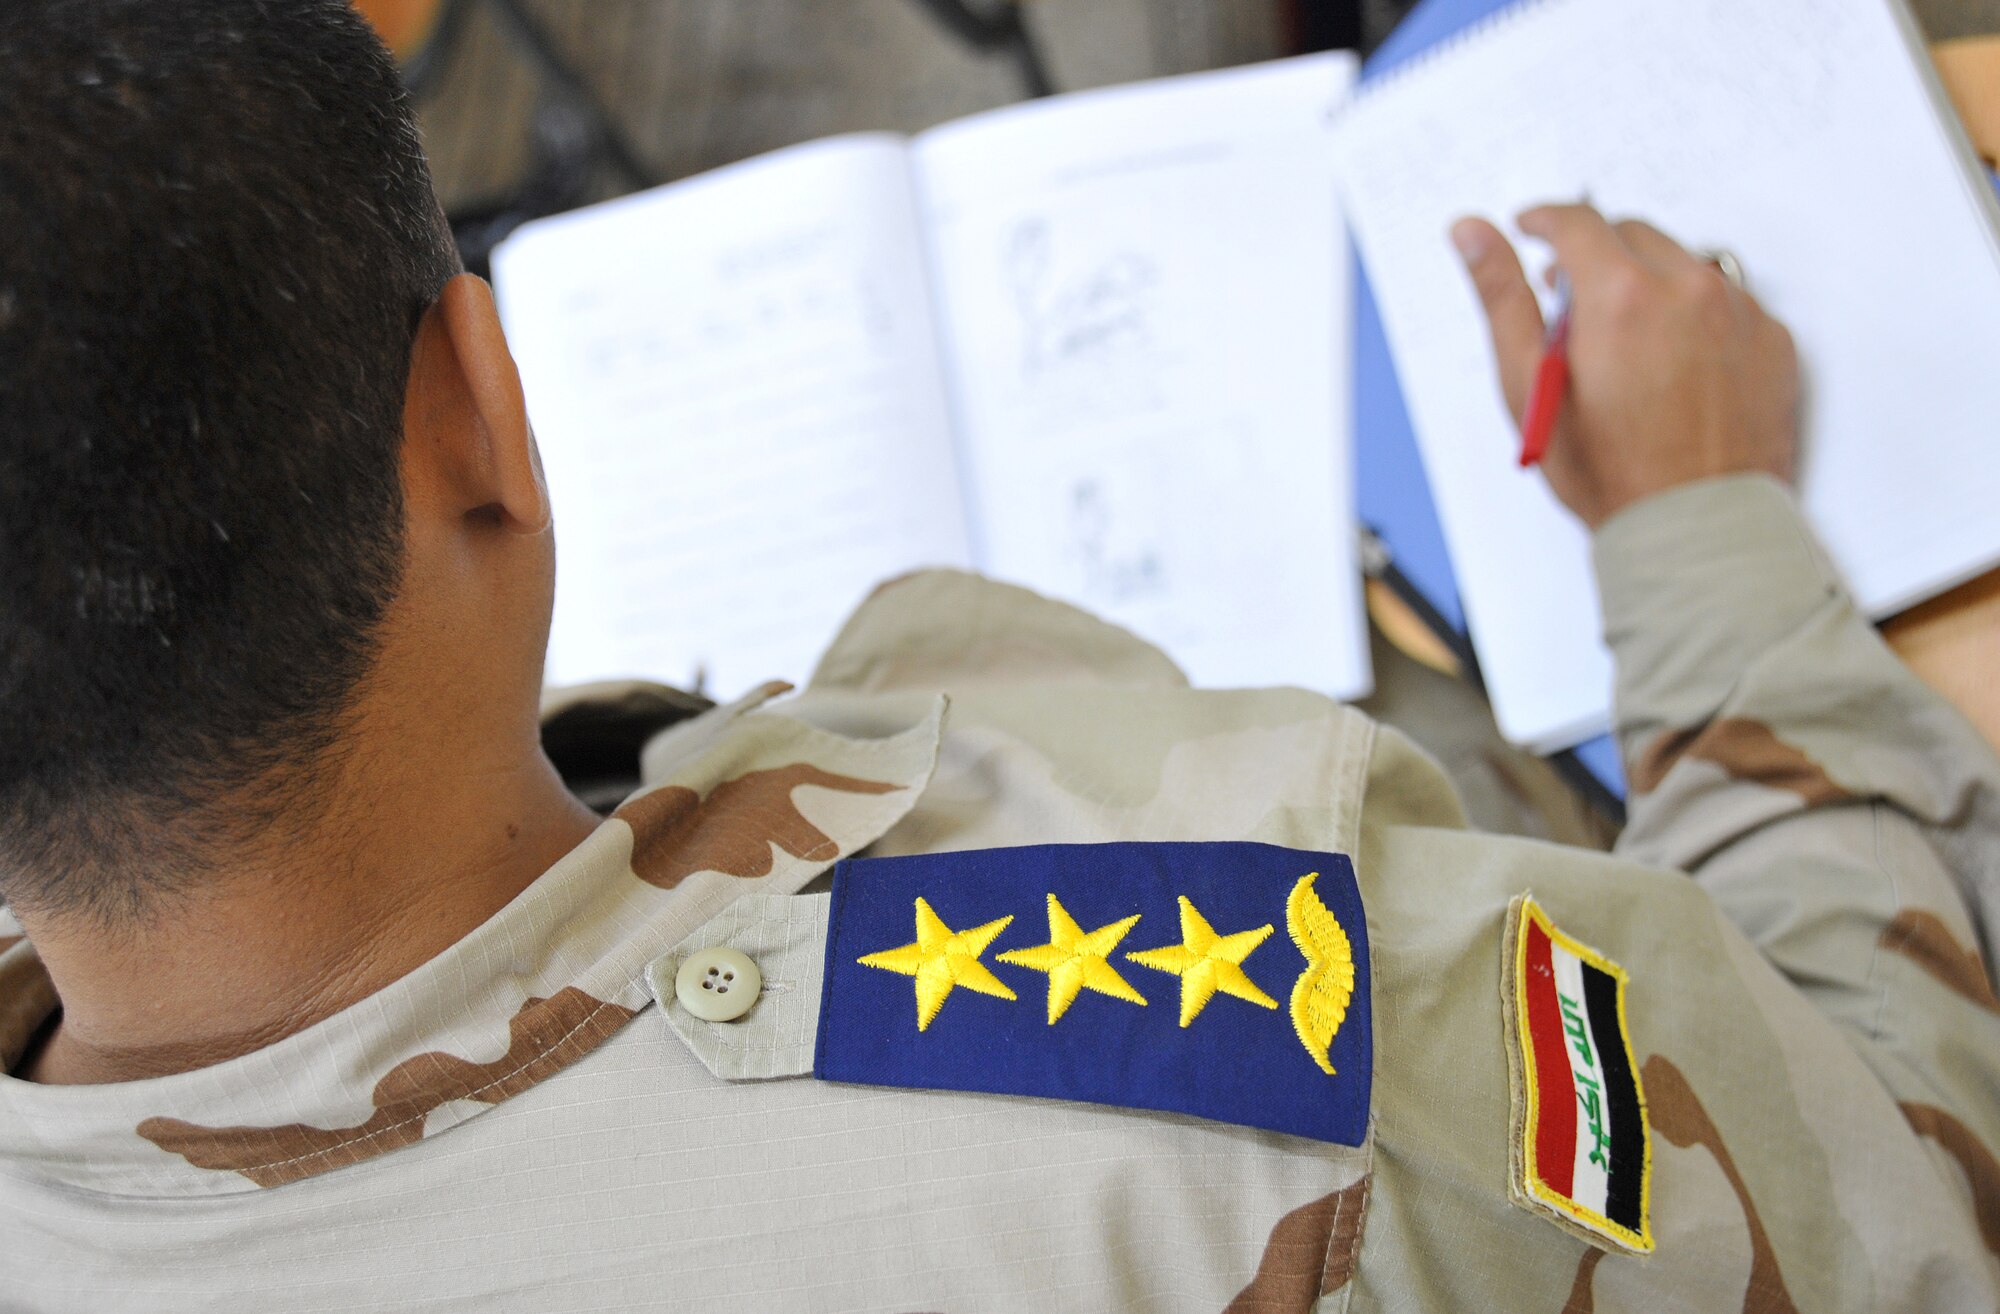 An Iraqi air force captain looks over a test booklet during an English language class at the Iraqi Air Force Training School Dec. 13, 2010, in Taji, Iraq. To date, 28 students have completed the training, which takes up to 12 months to complete. (U.S. Air Force photo/Senior Airman Andrew Lee)
